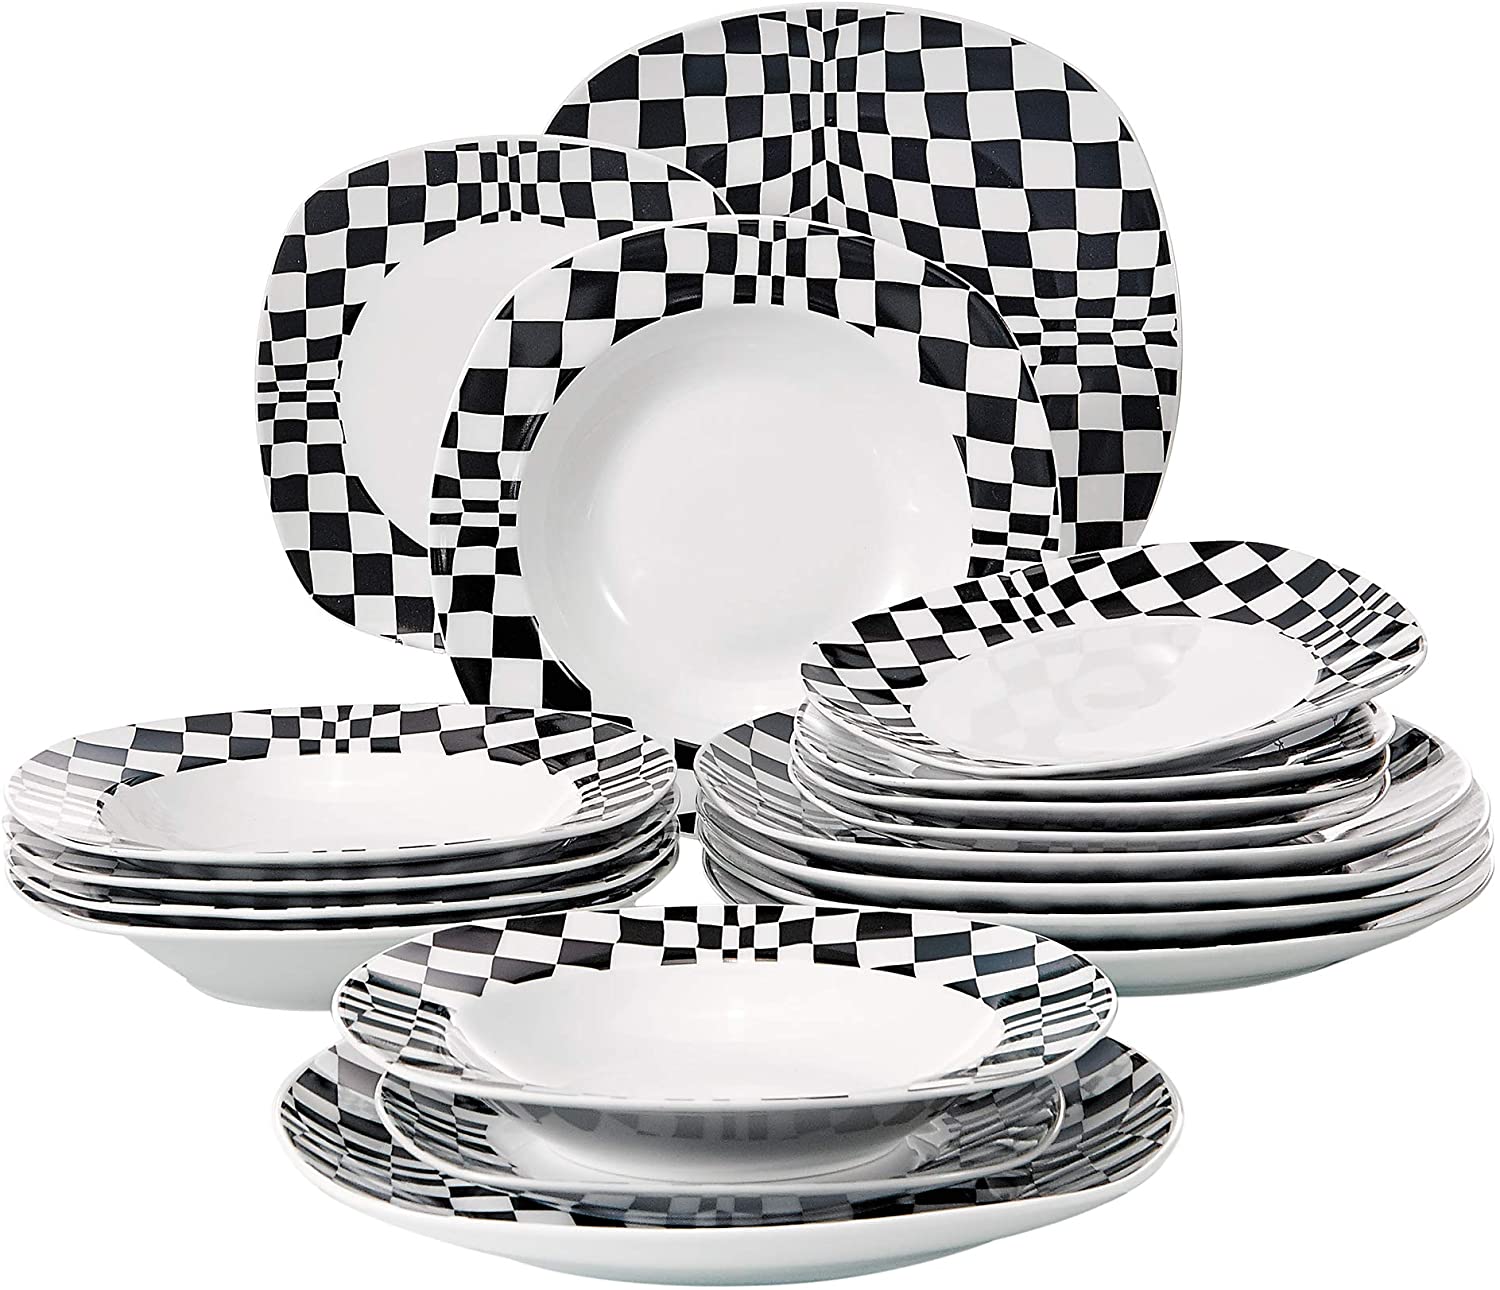 VEWEET Dinner Service \'Louise\' Made of Porcelain 18 Pieces | Plate Set for 6 People | Each with 6 Dessert Plates, Deep Plates and Flat Plates